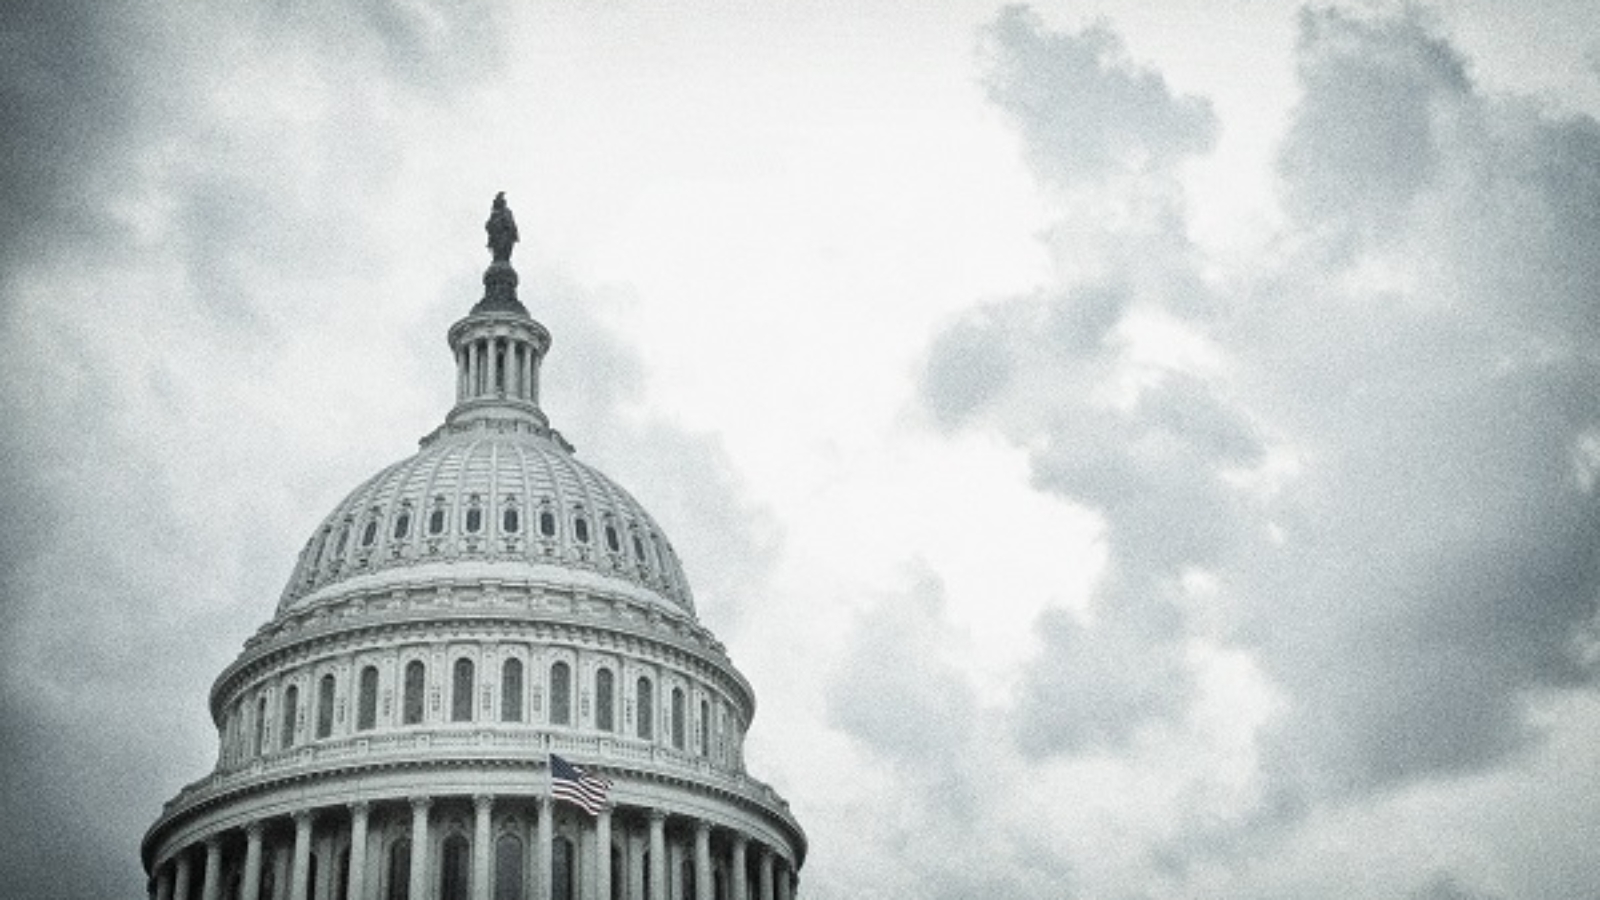 Textured image of the United States Capitol dome on a cloudy day